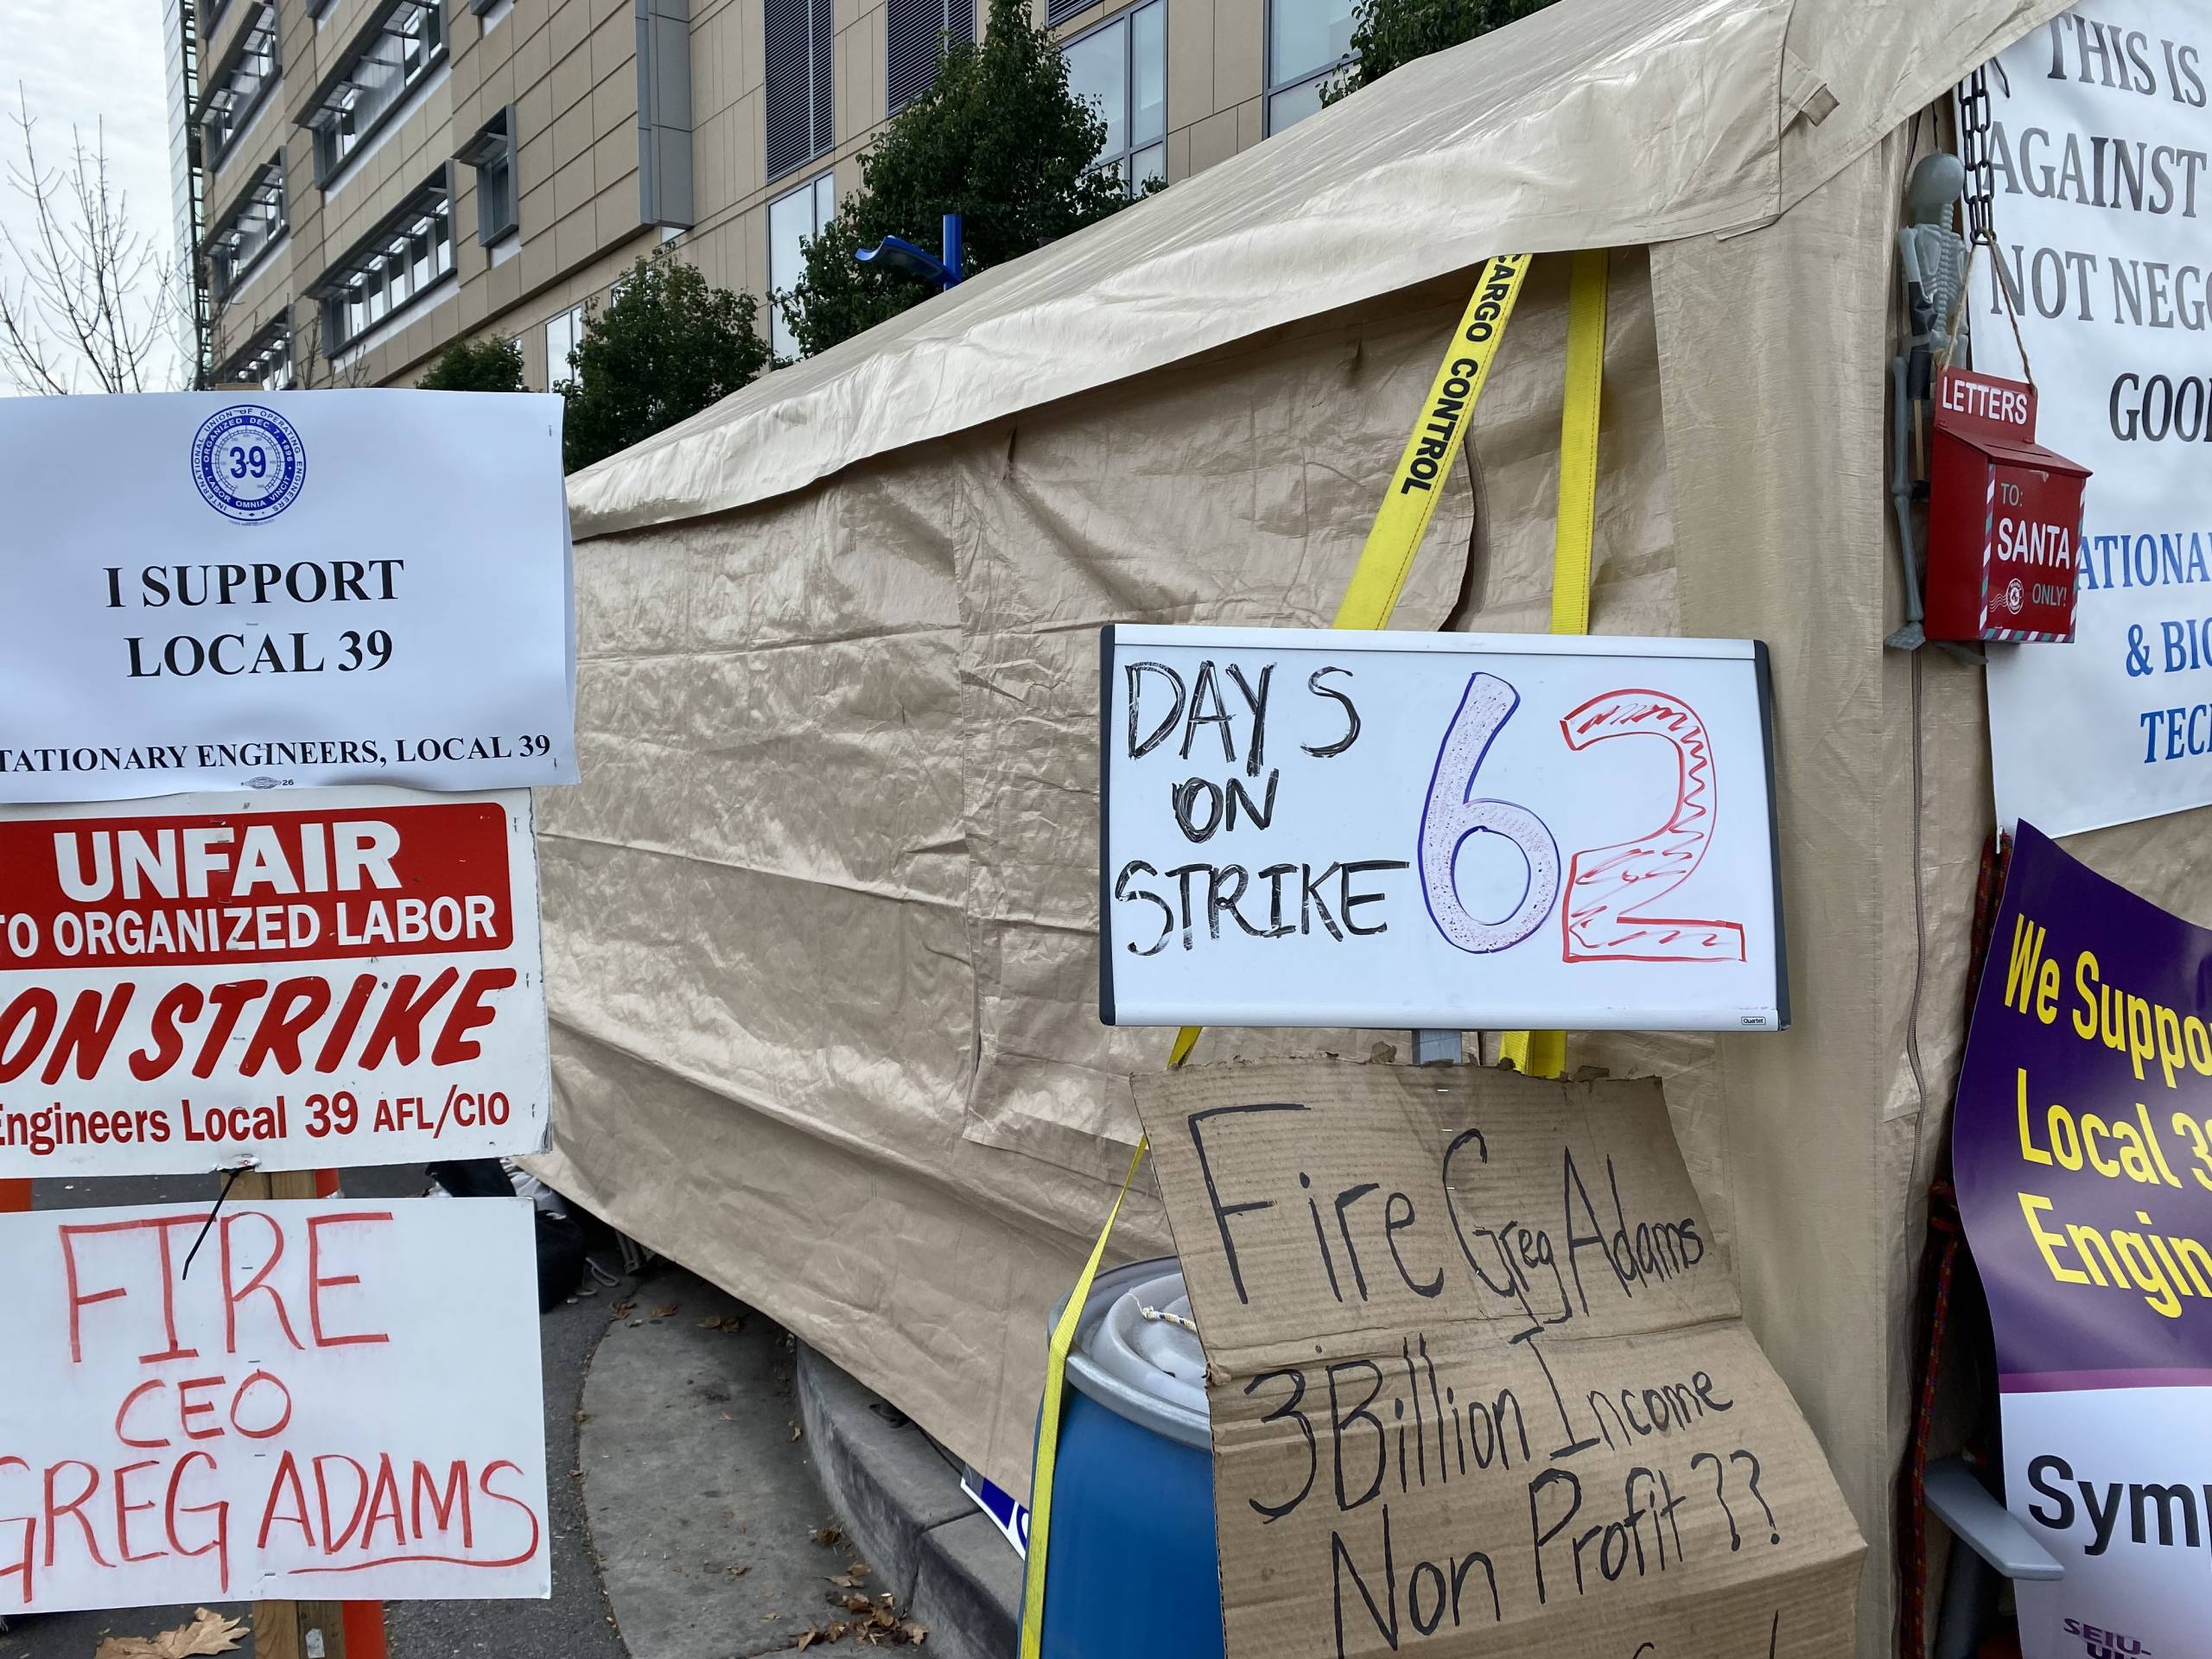 Tent with sign reading "Days on Strike: 62" and "Fire CEO Greg Adams" and "I Support Local 39," the union representing Kaiser's stationery engineers.